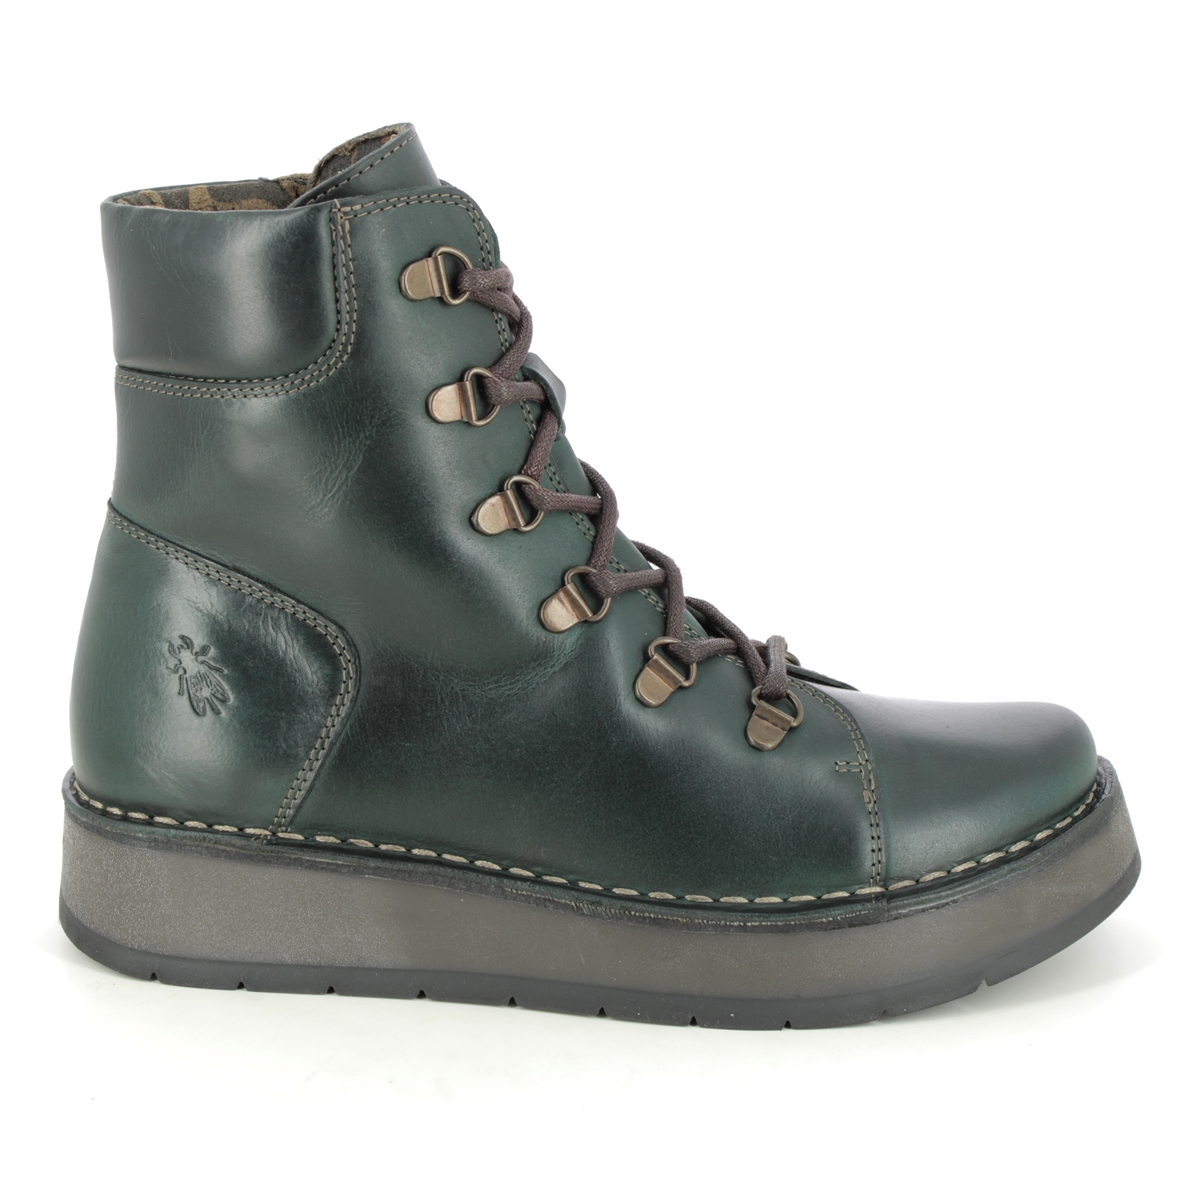 Fly London Roxy Ravi Petrol leather Womens Lace Up Boots P211094-002